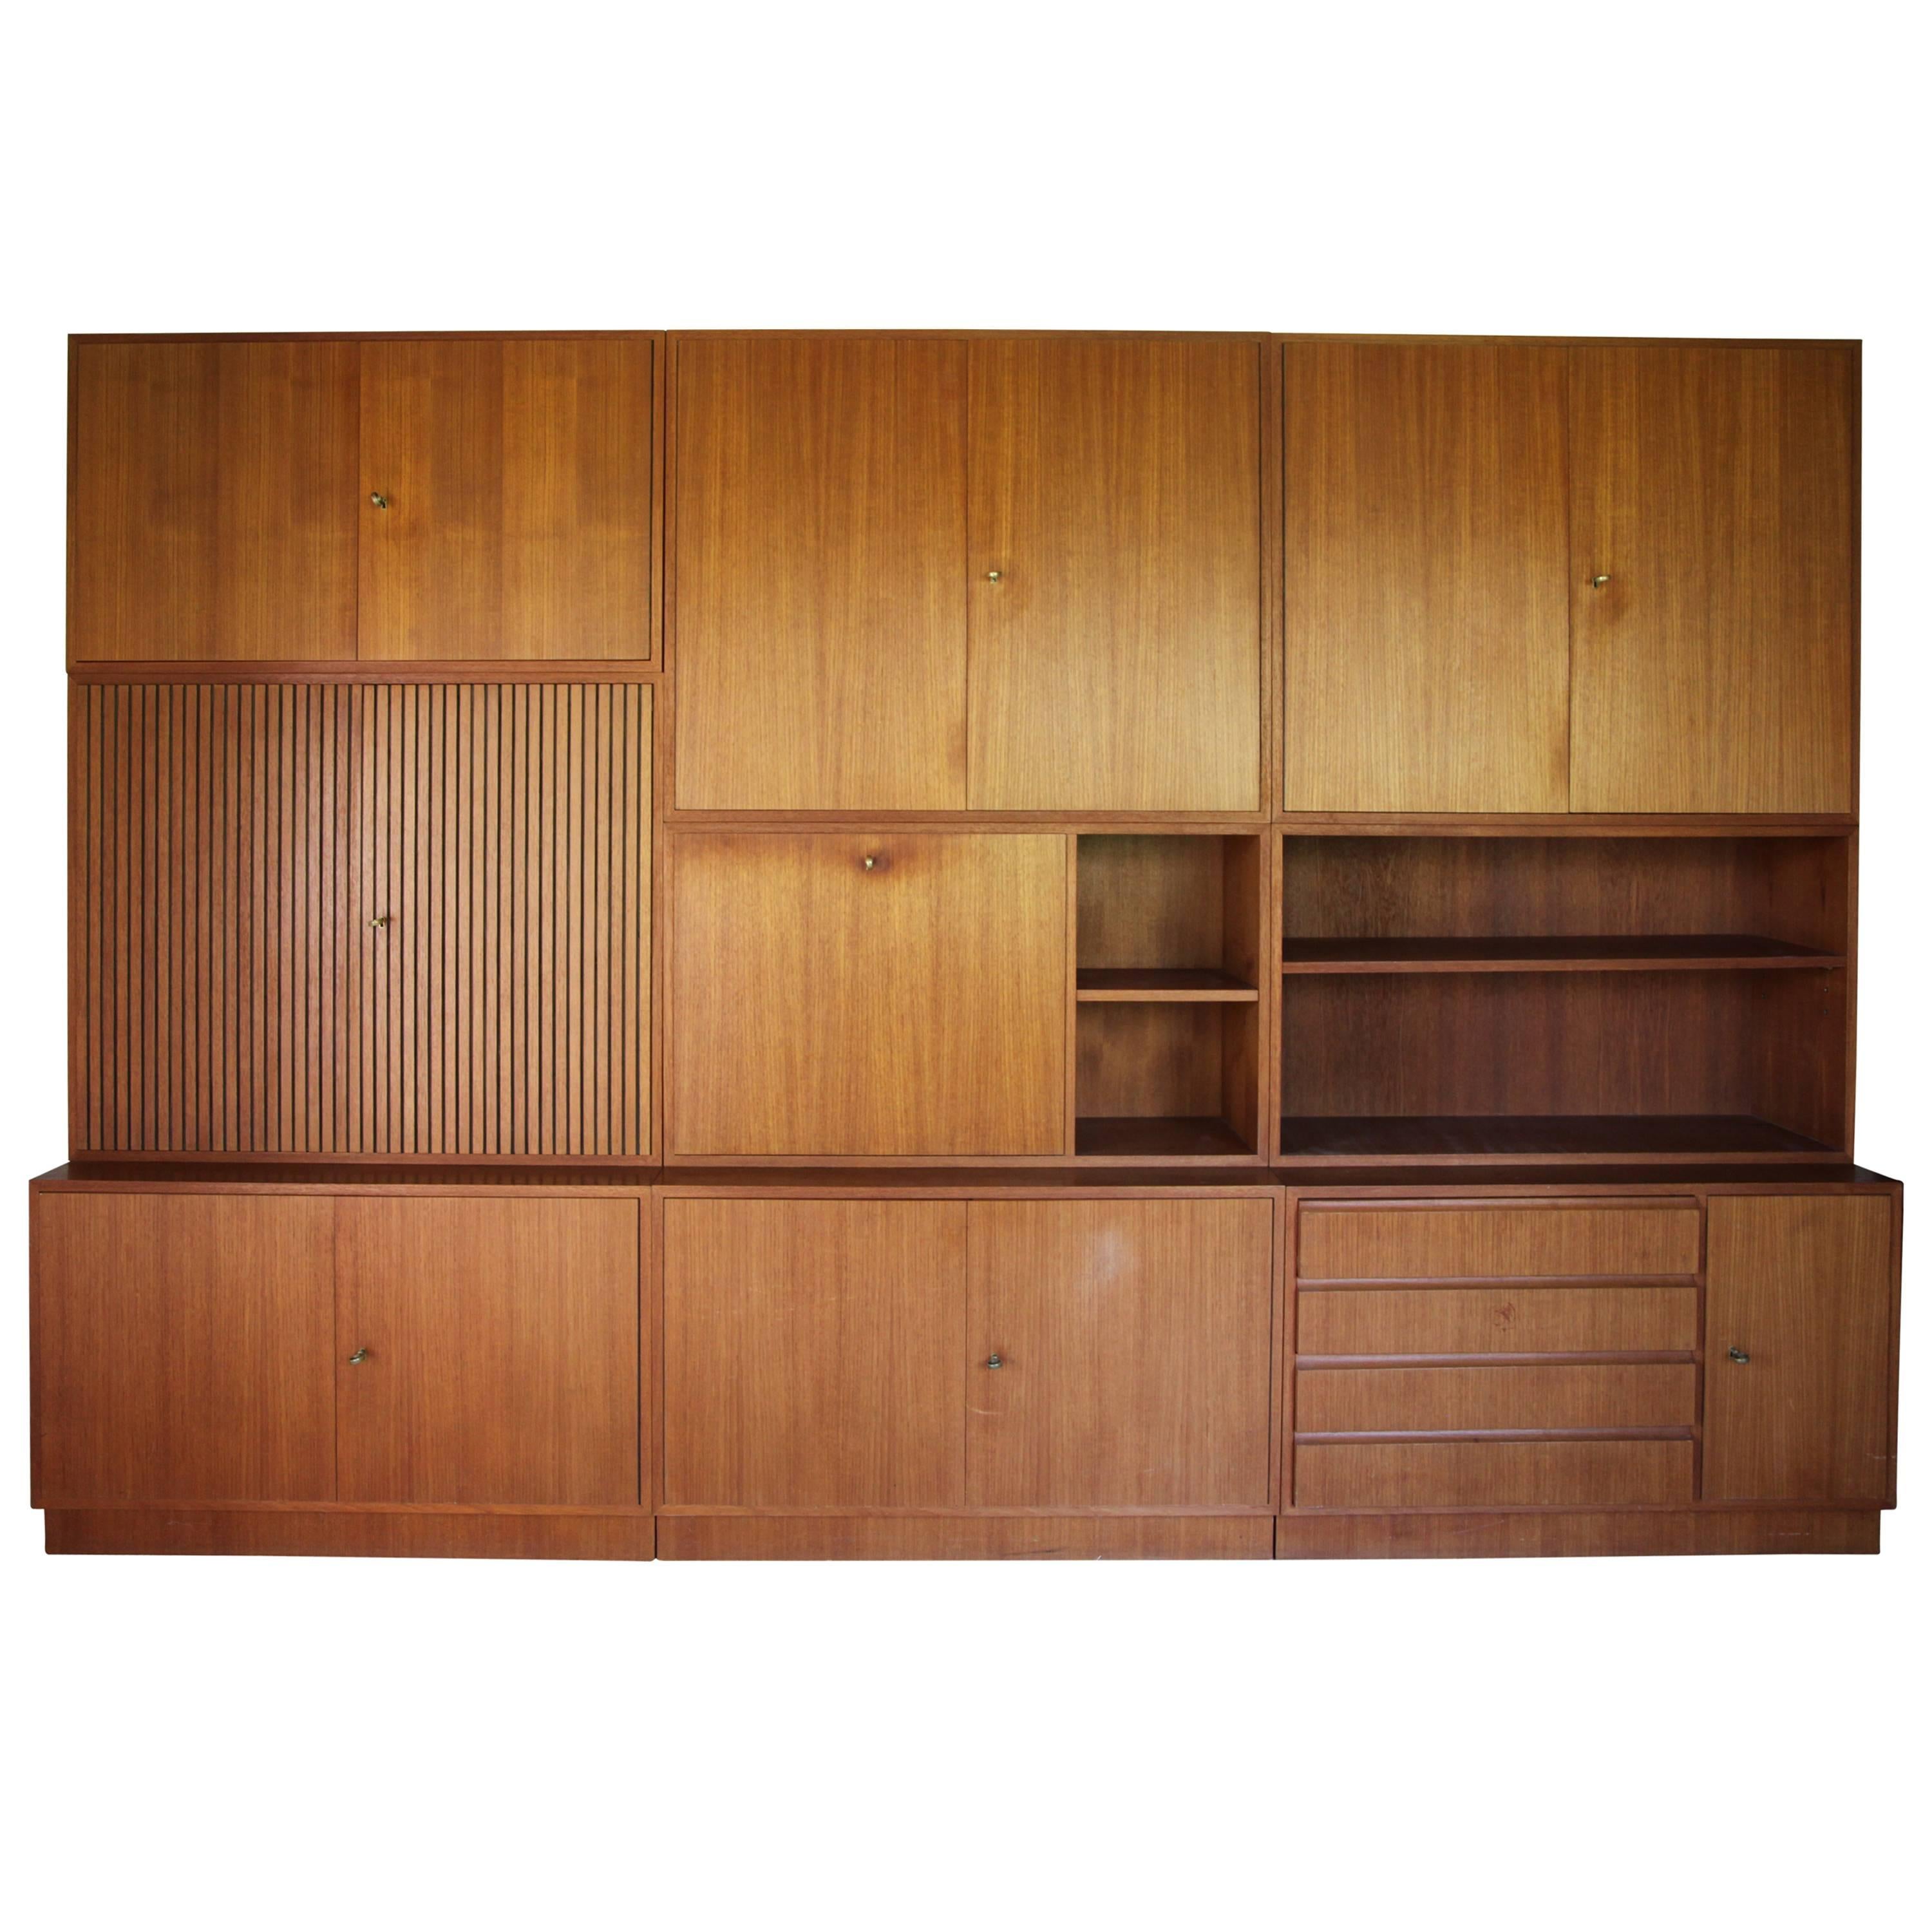 Modular Wall Unit Designed by Georg Satink for WK Möbel, Germany, 1952 For Sale